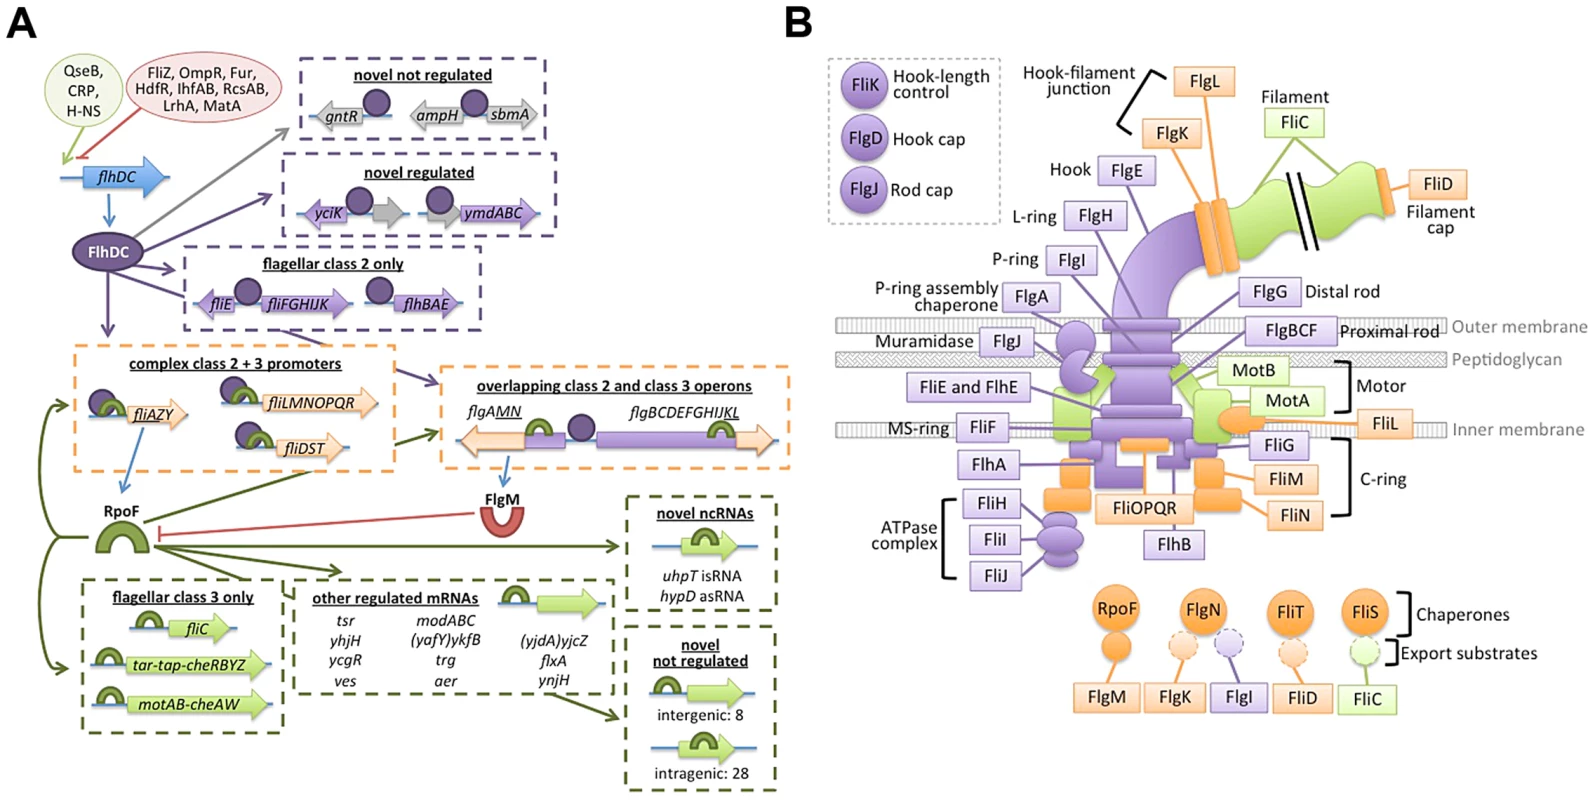 Updated flagellar transciption network and localization of dual-regulated targets.